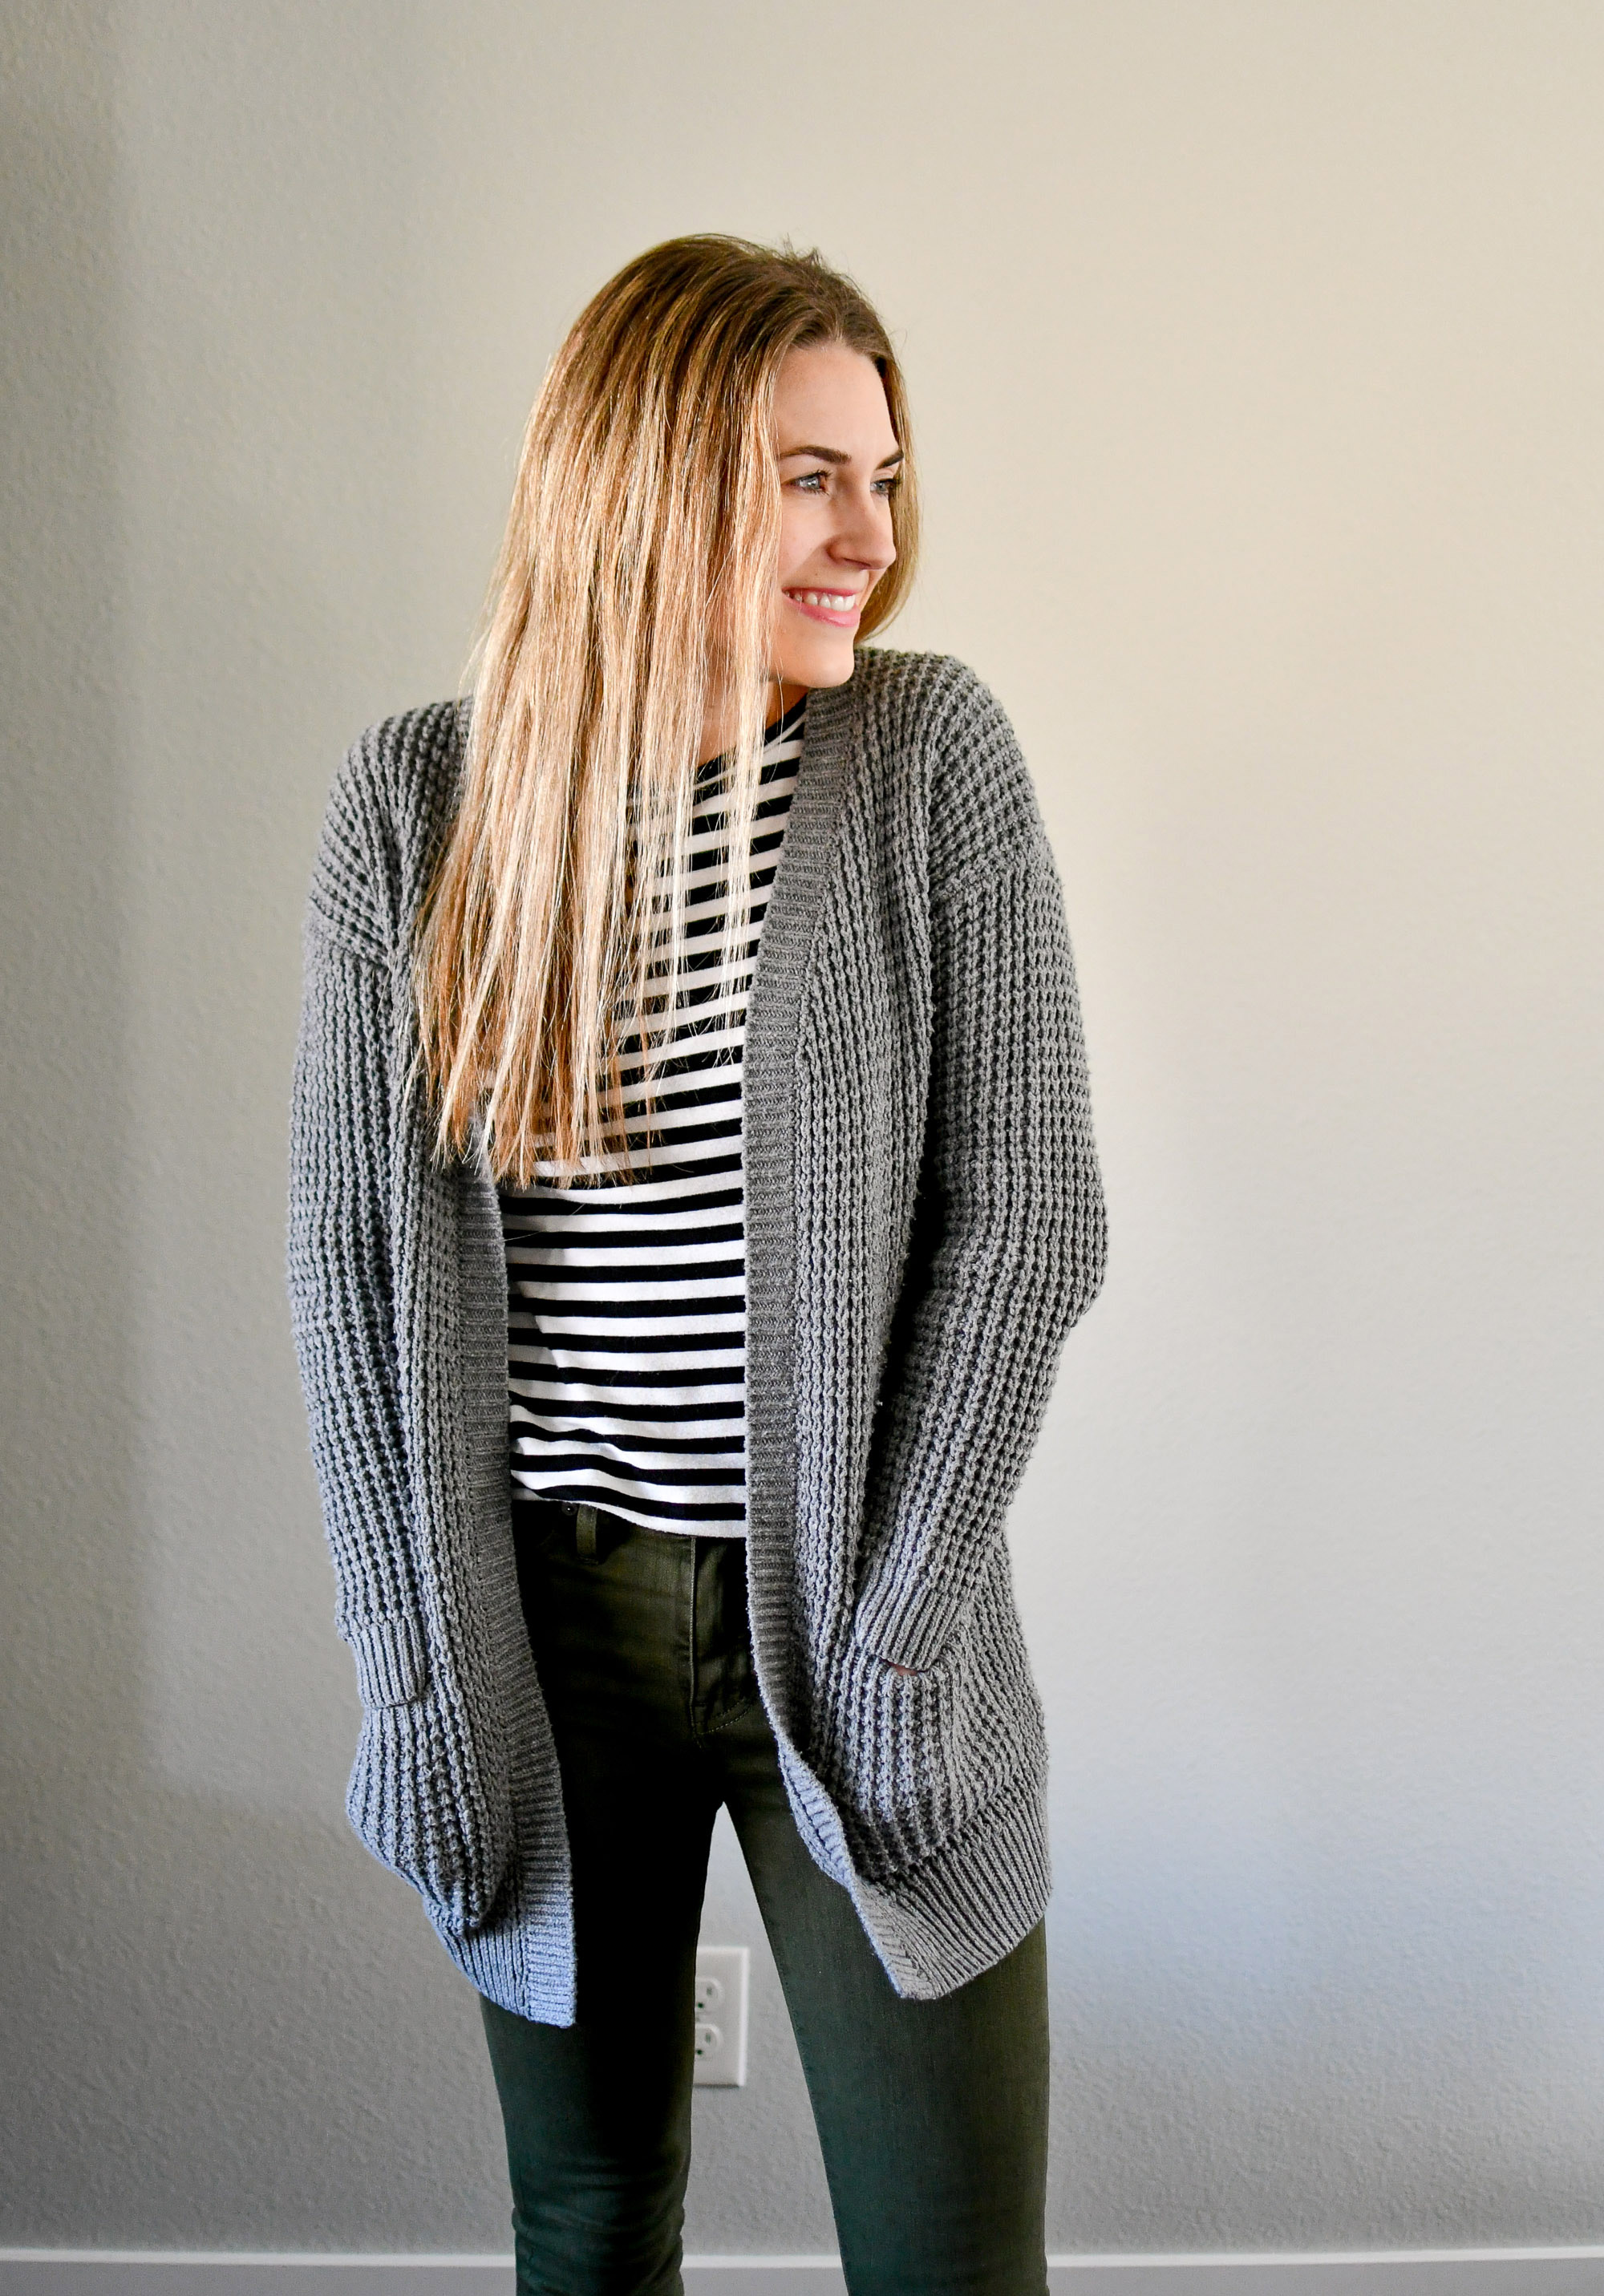 Grey cardigan winter outfit with striped tee — Cotton Cashmere Cat Hair